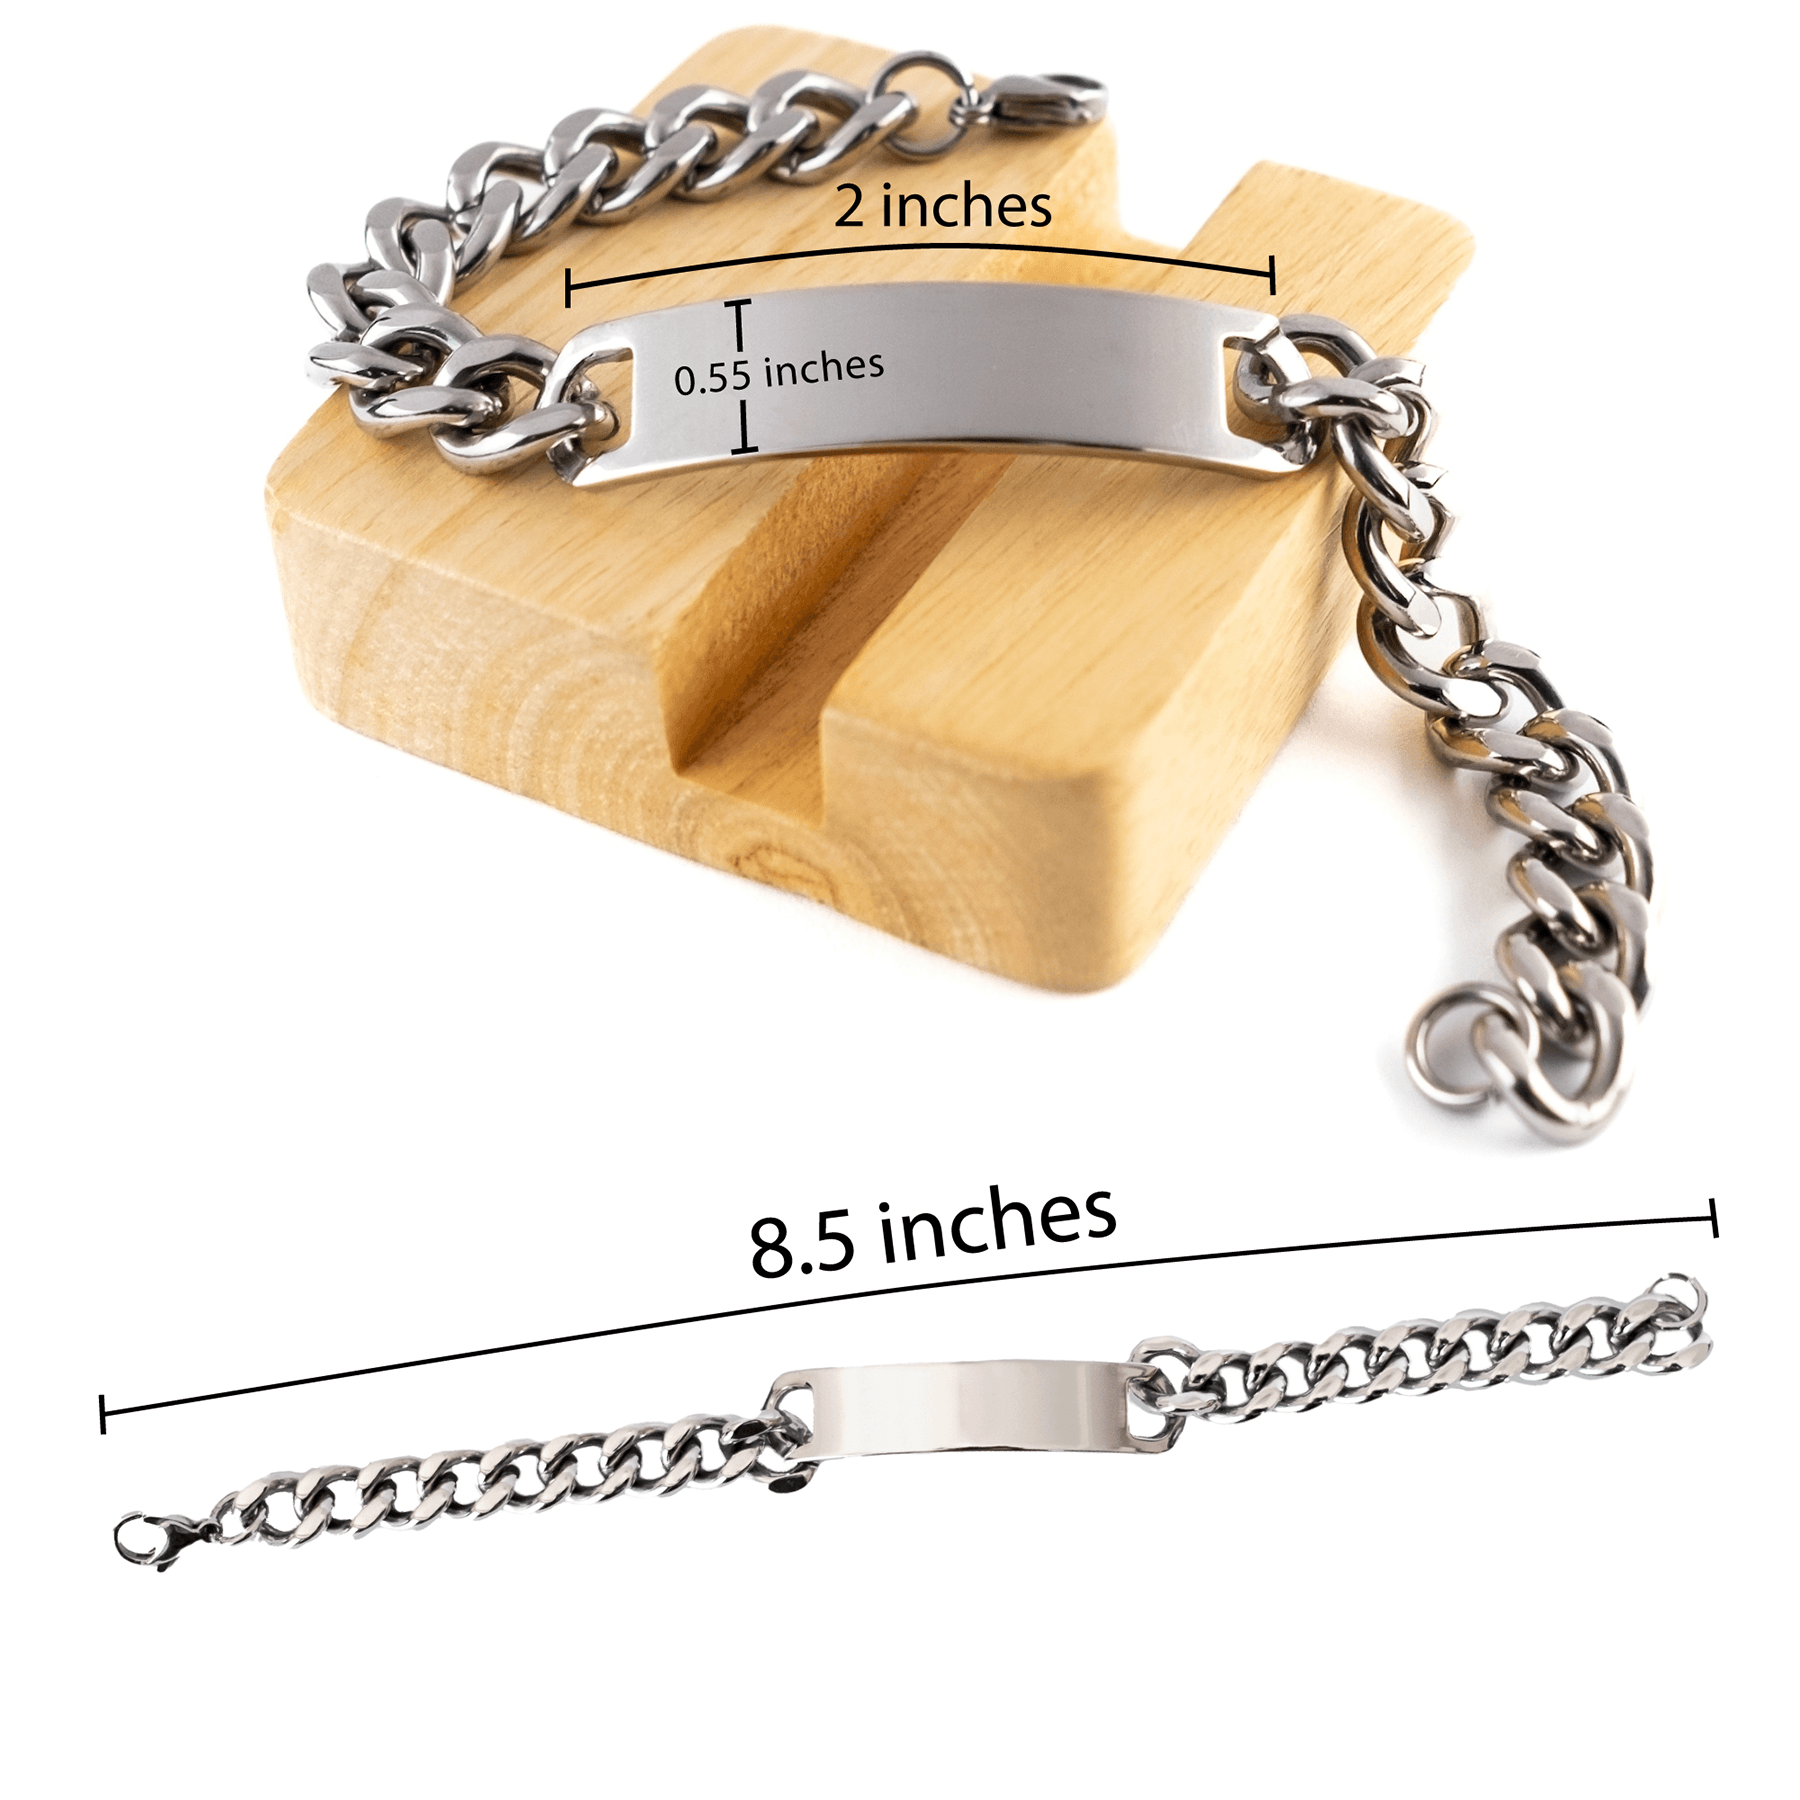 Inspirational Father-In-Law Cuban Chain Stainless Steel Engraved Bracelet - Behind you, all your Memories, Before you, all your Dreams - Birthday, Christmas Holiday Gifts - Mallard Moon Gift Shop